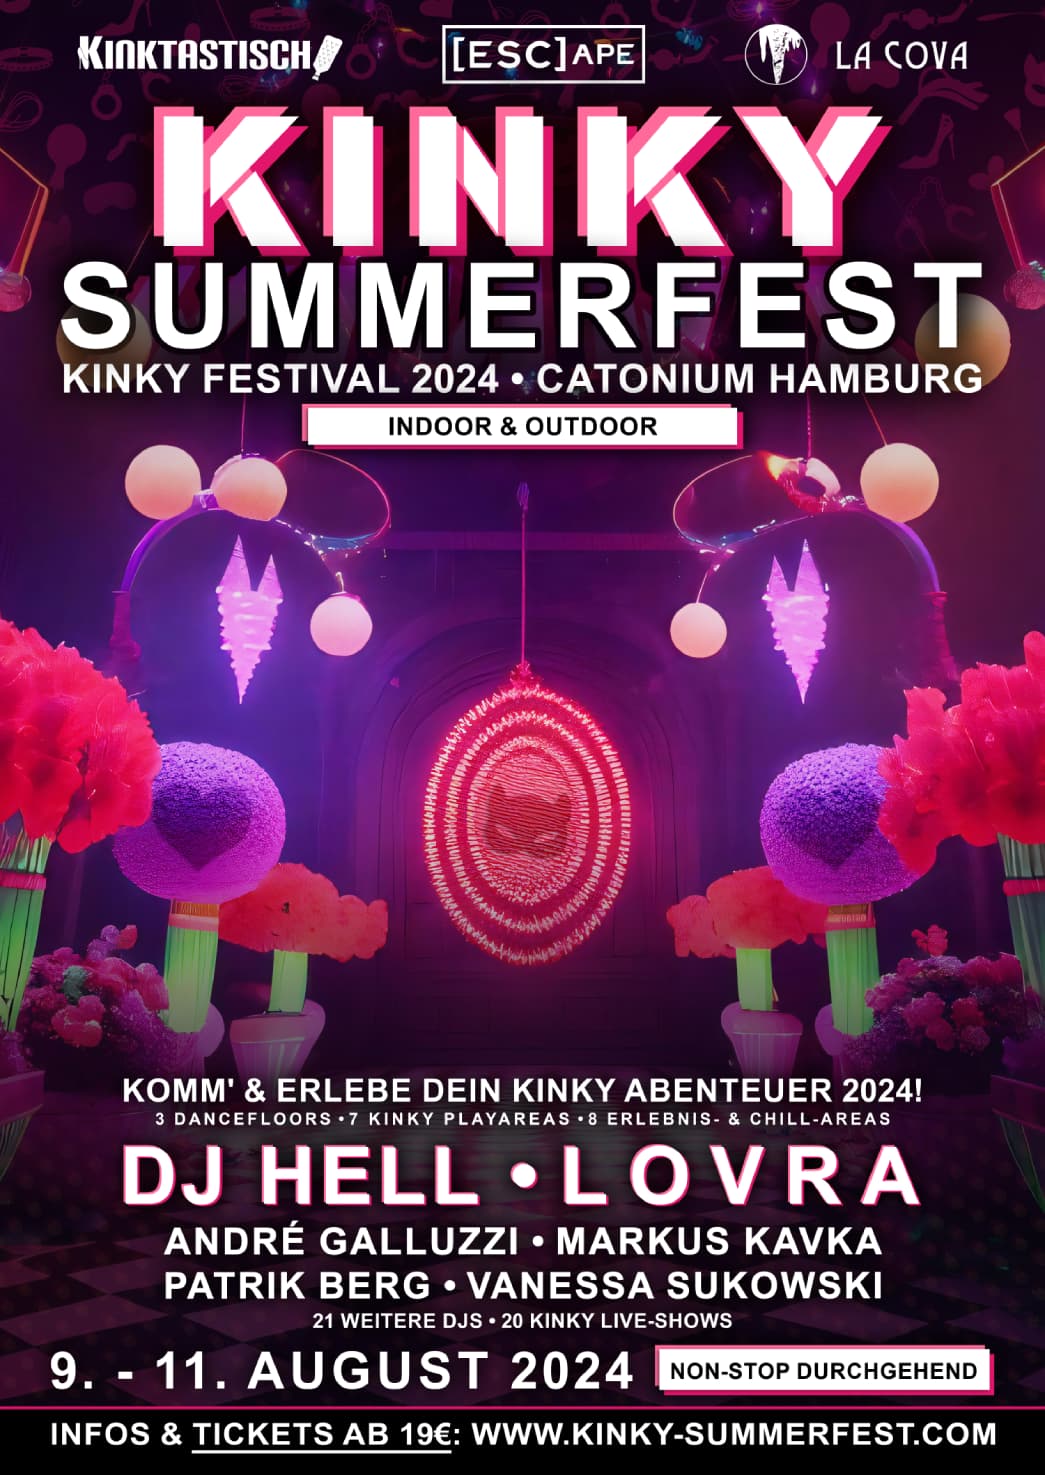 KINKY SUMMERFEST 2024 with DJ Hell, Lovra and many more